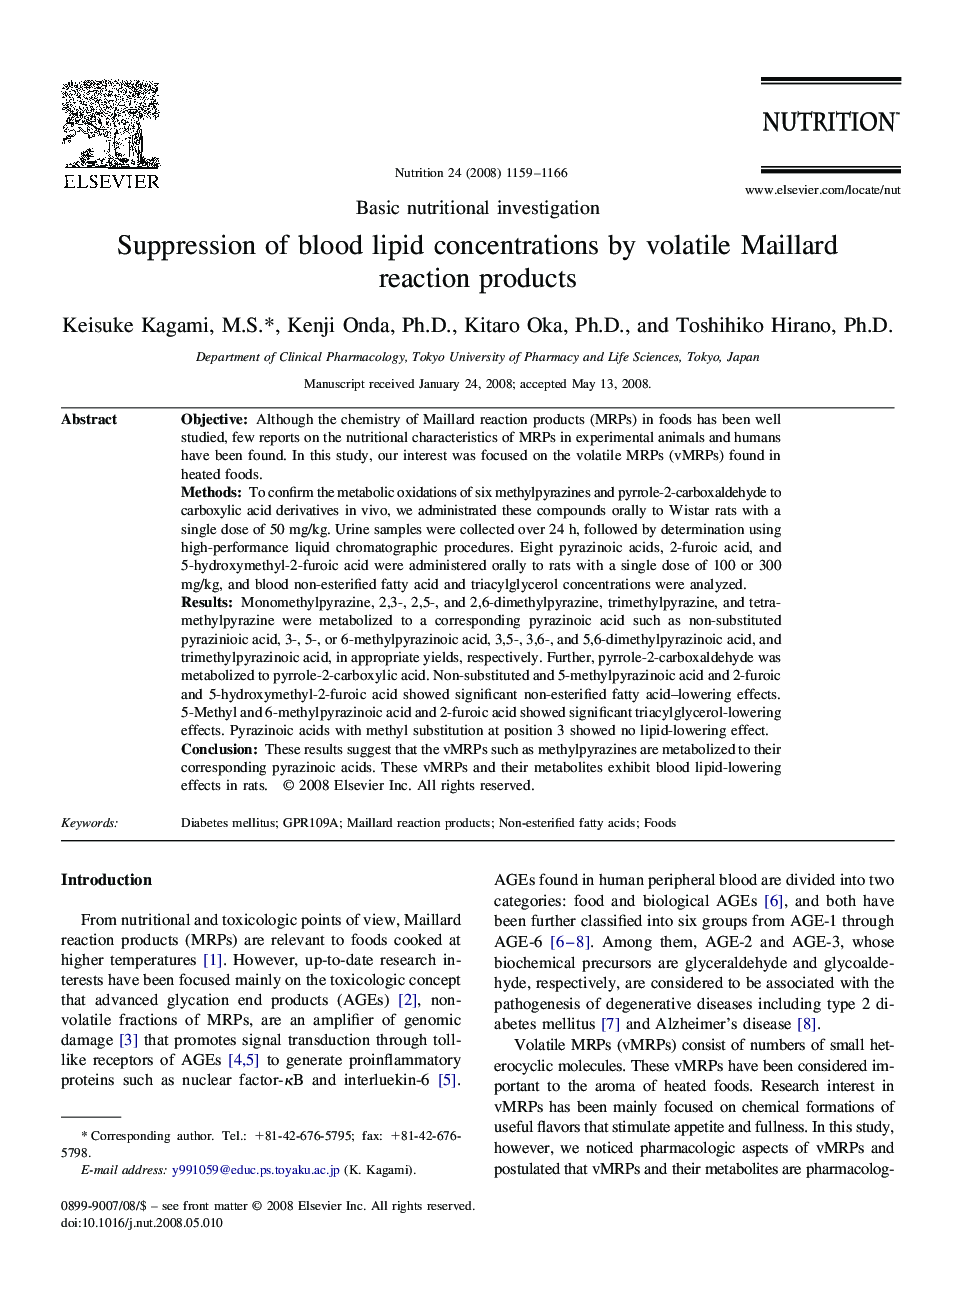 Suppression of blood lipid concentrations by volatile Maillard reaction products